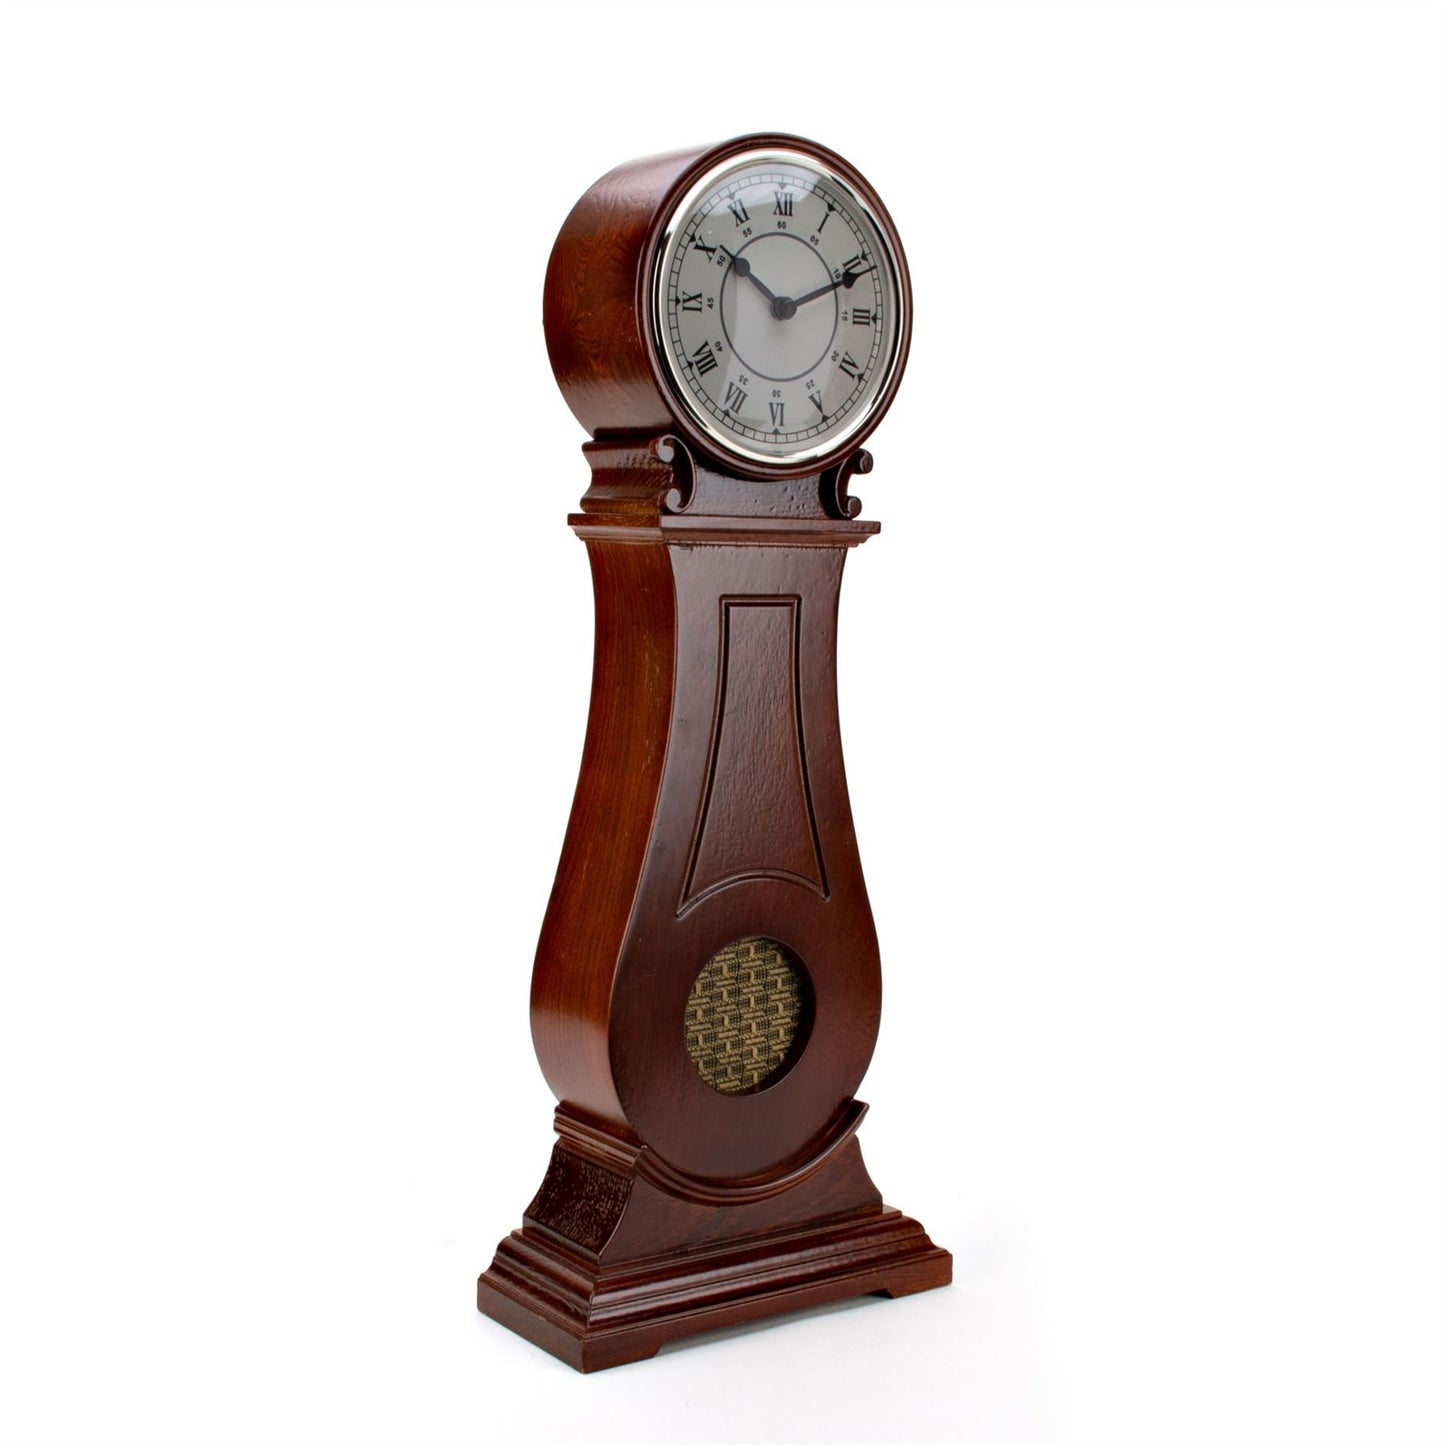 Wm. Widdop Tall Wooden Table Clock with Roman Numerals